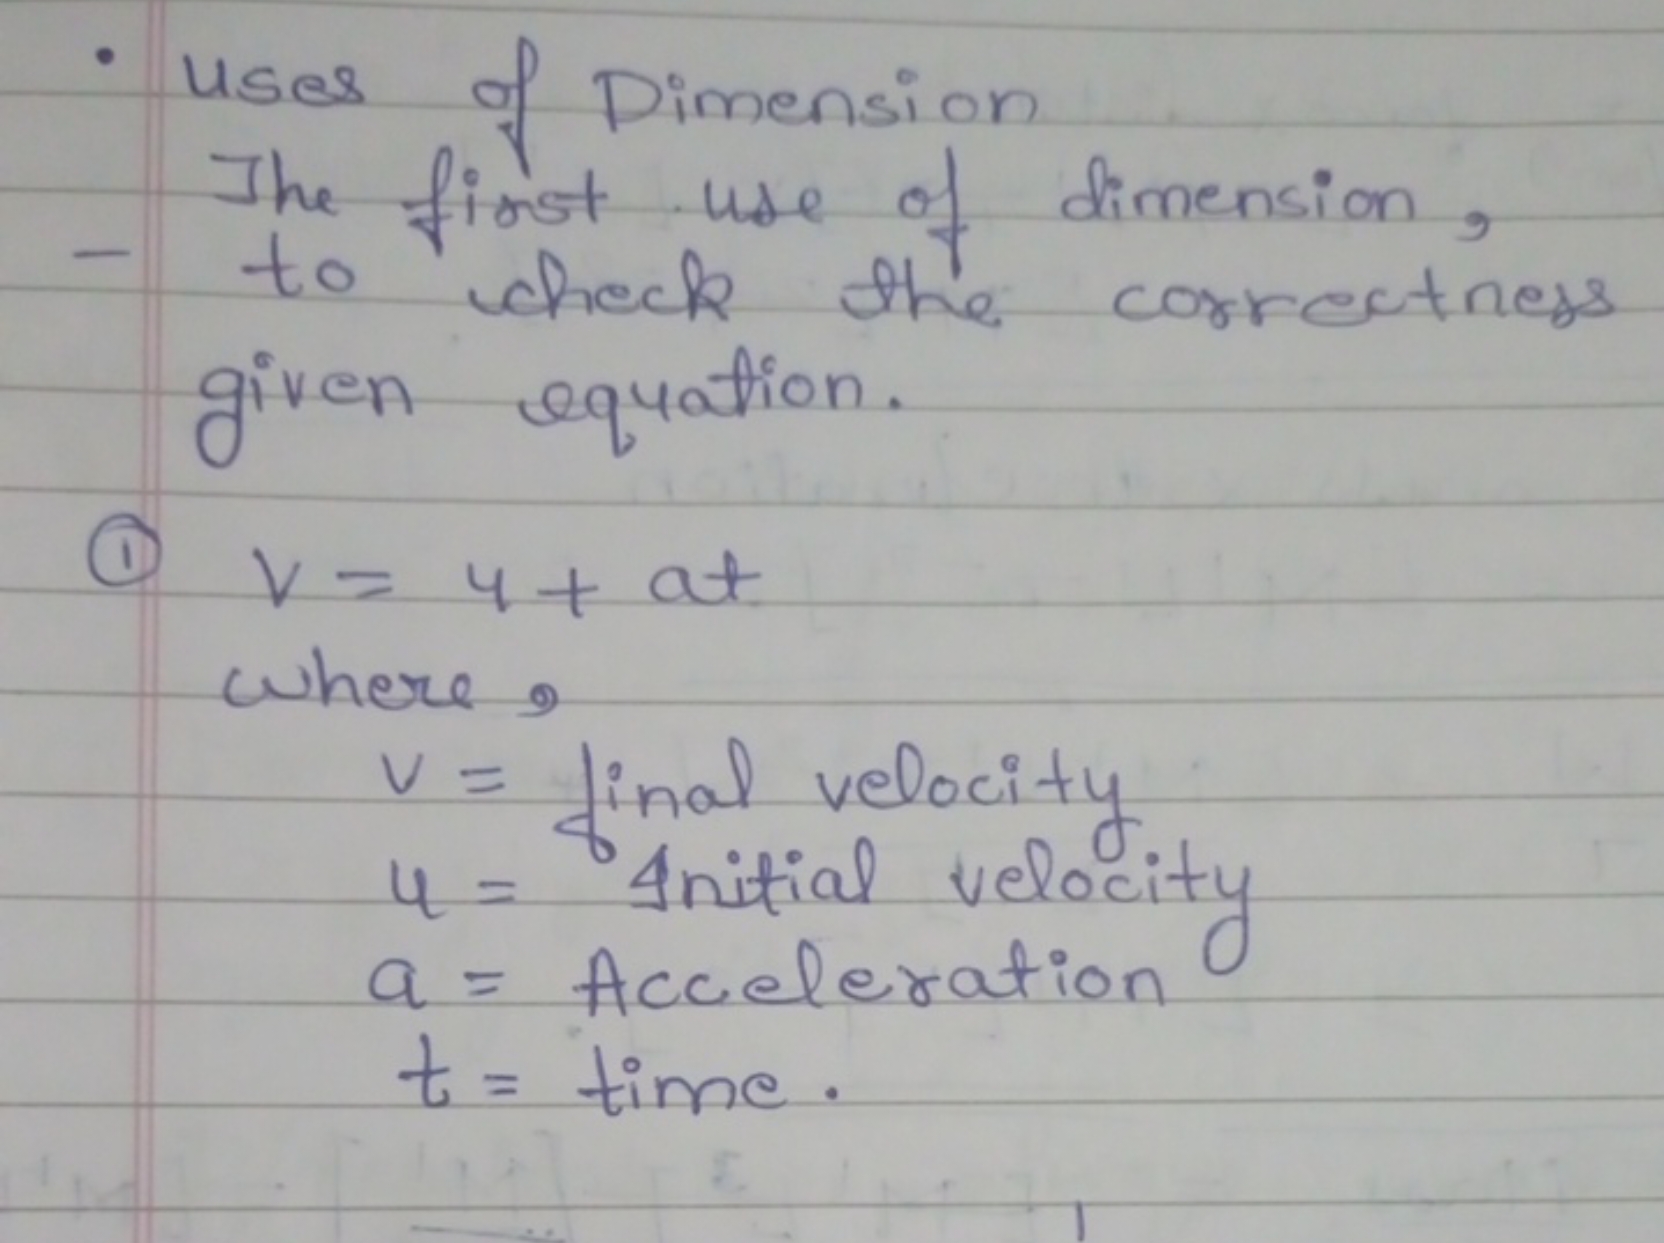 - Uses of Dimension
The first use of dimension,
- to check the correct